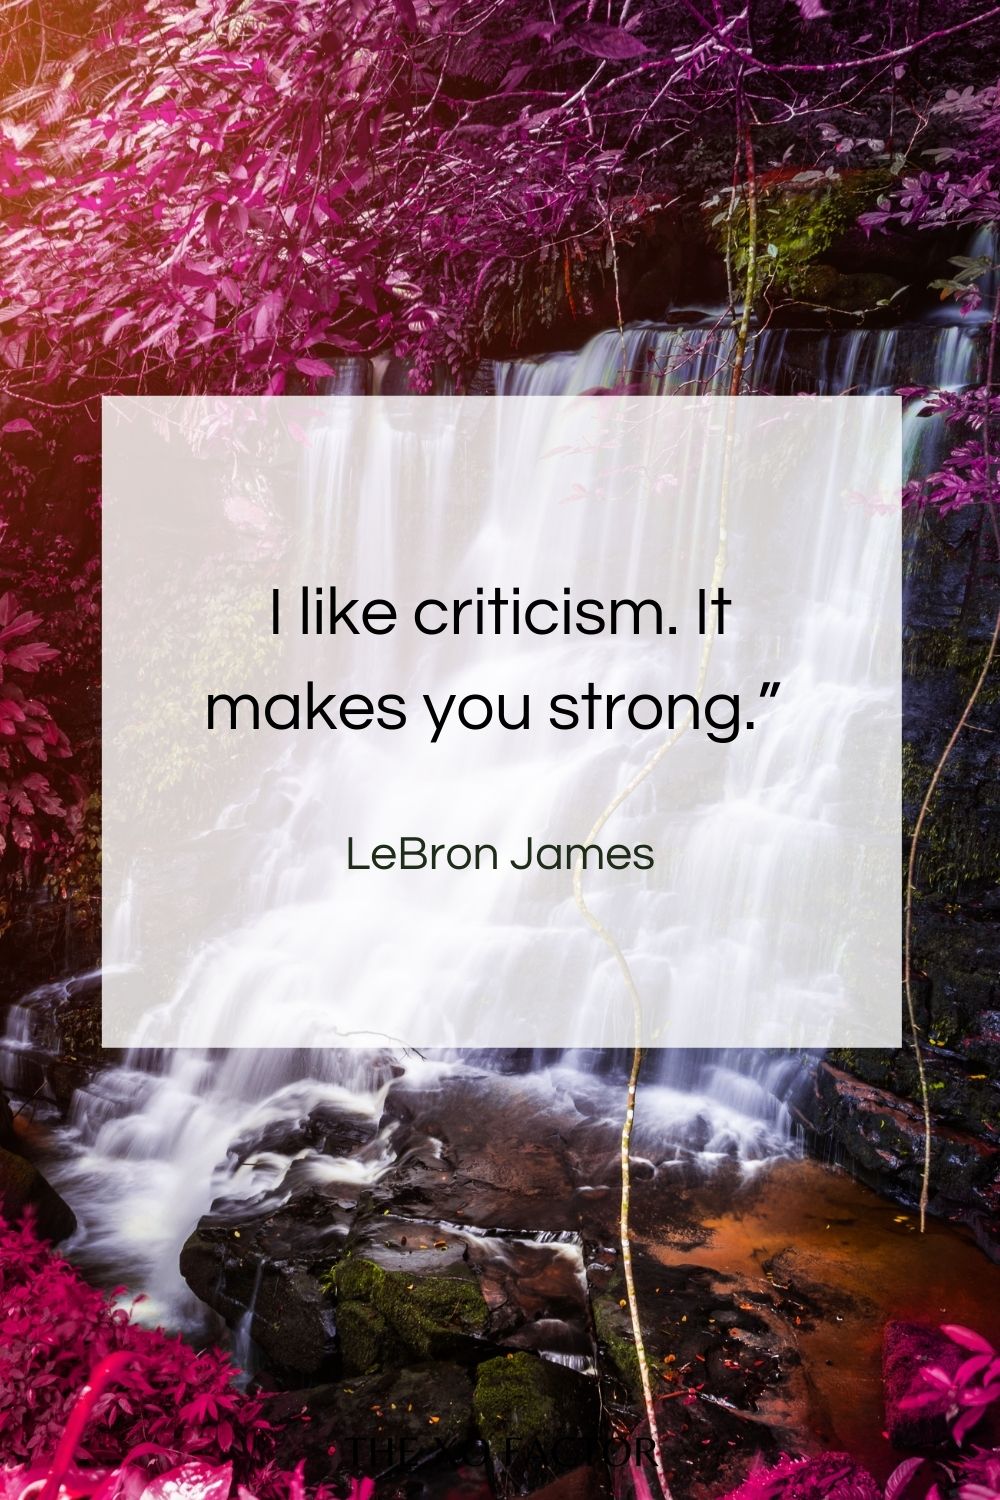 “I like criticism. It makes you strong.”  LeBron James